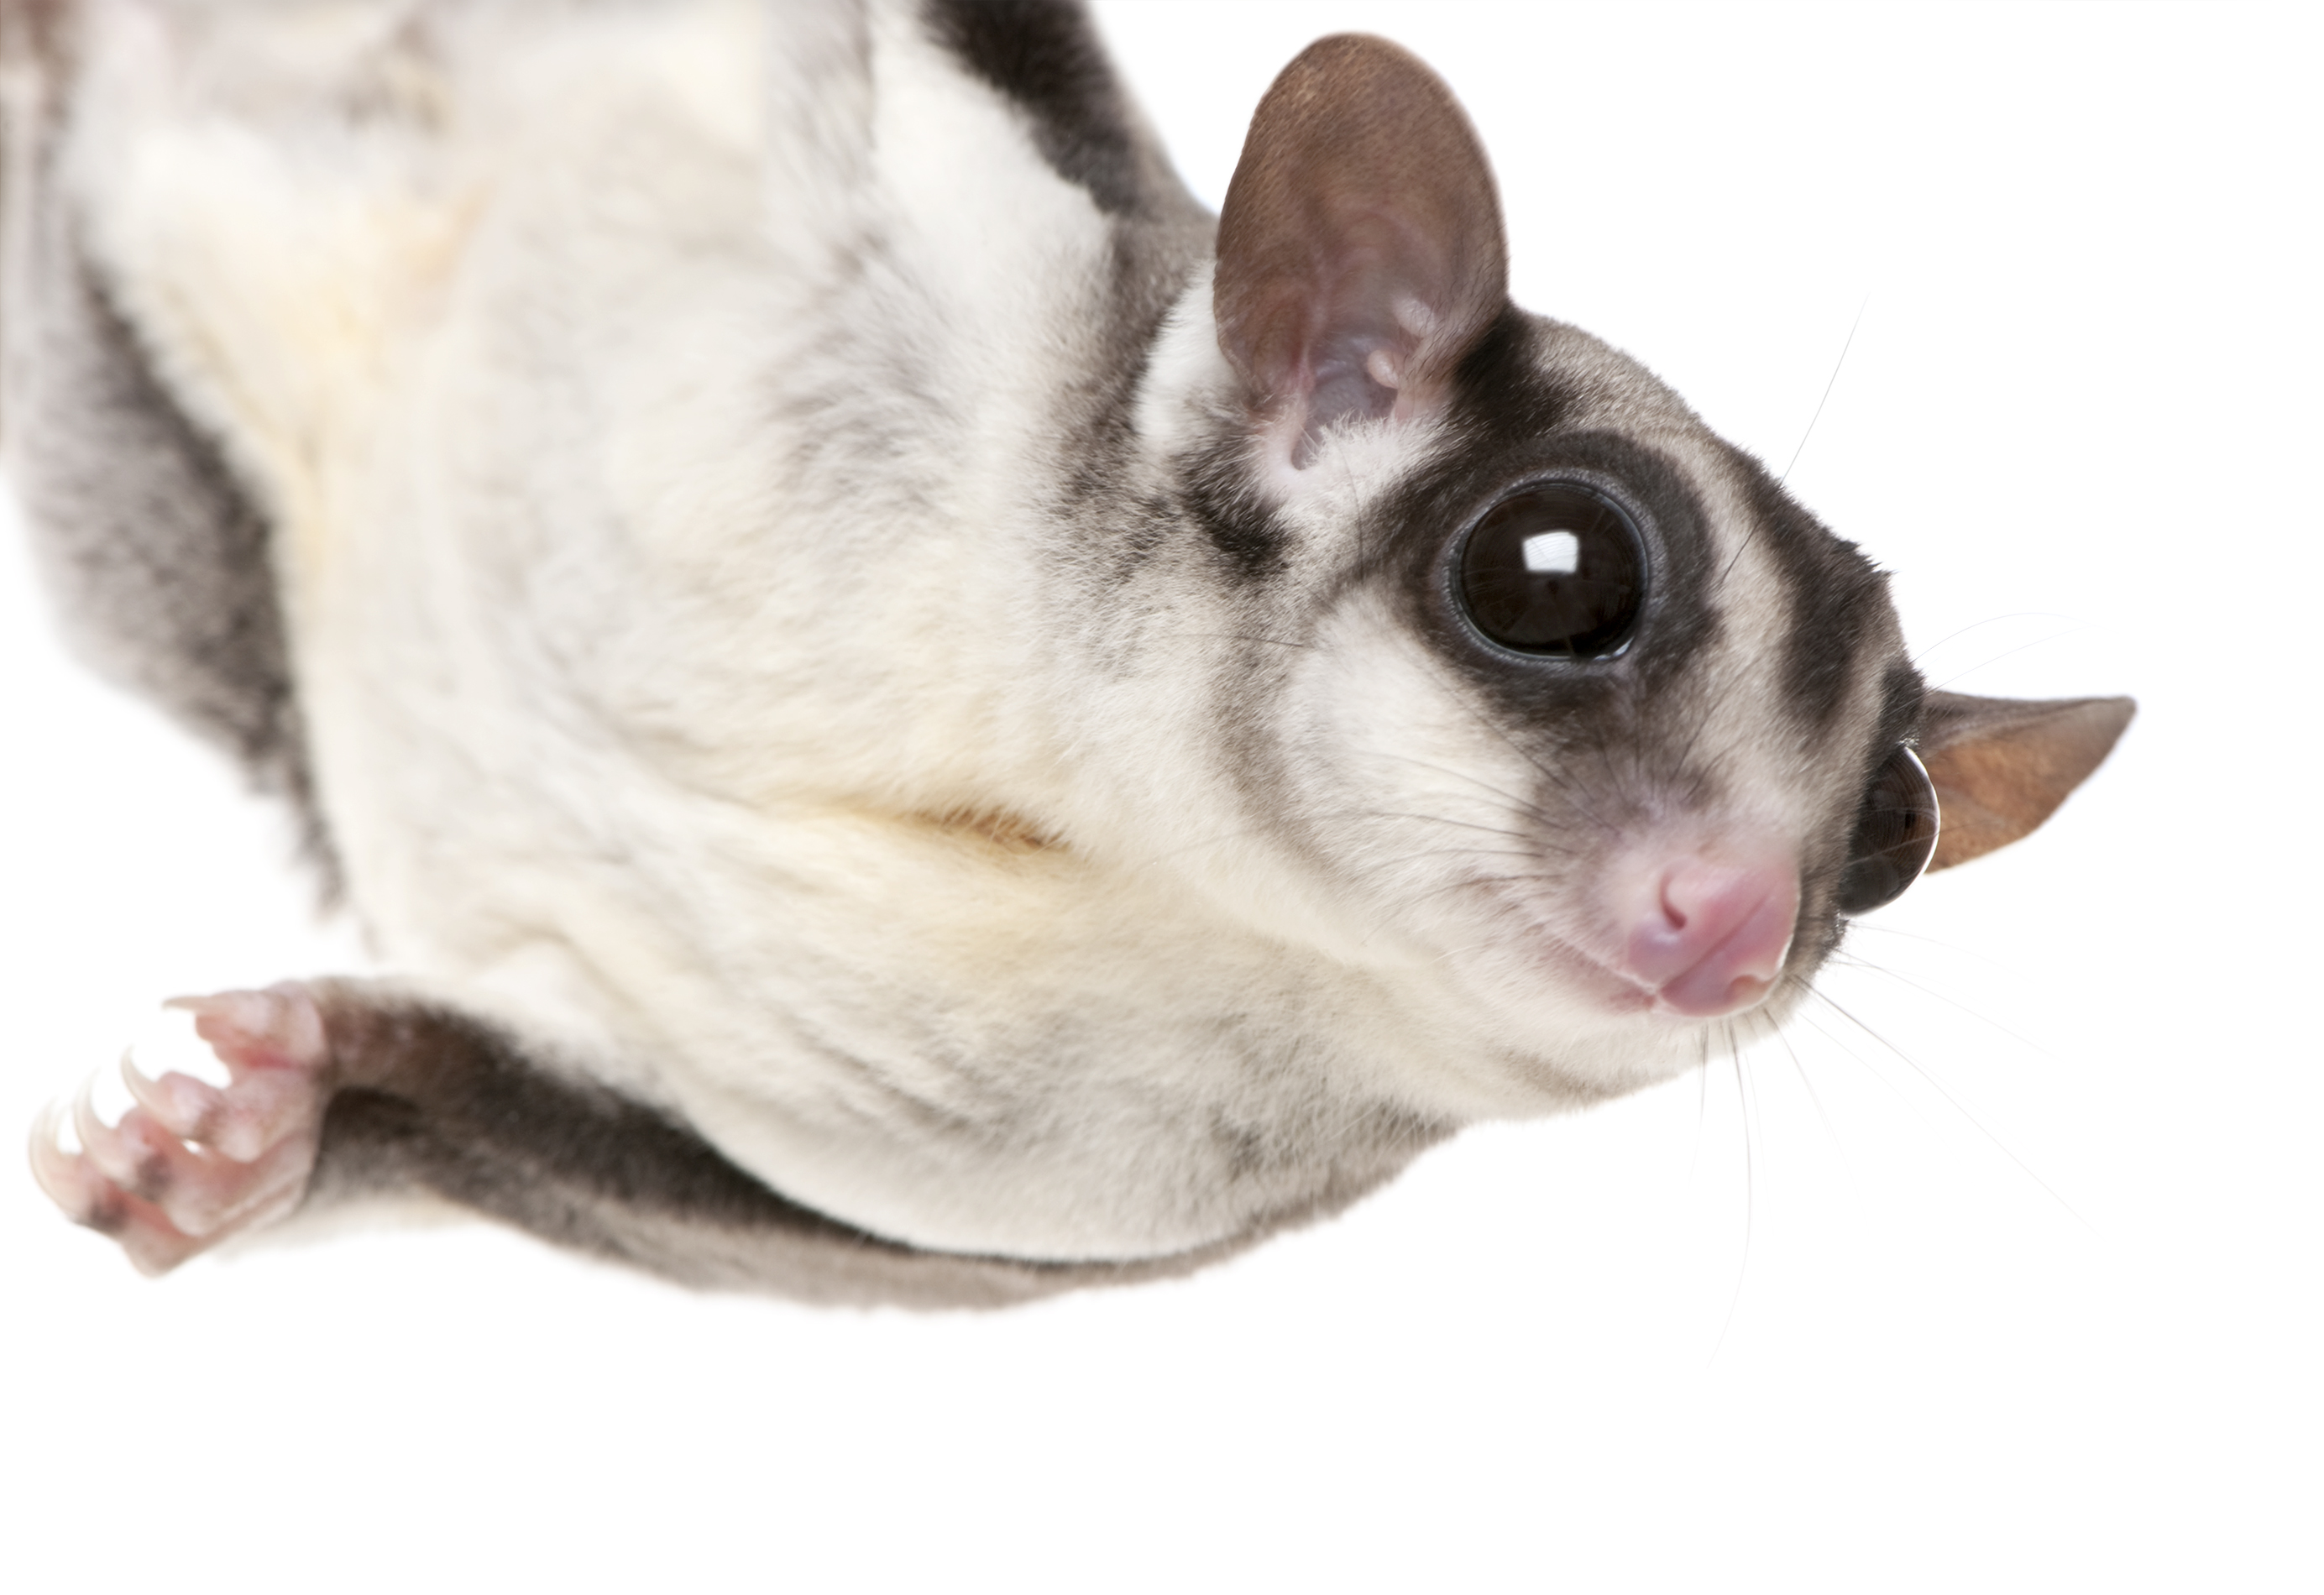 Sugar Gliders: Caring for Your Pet - Andes-Straley